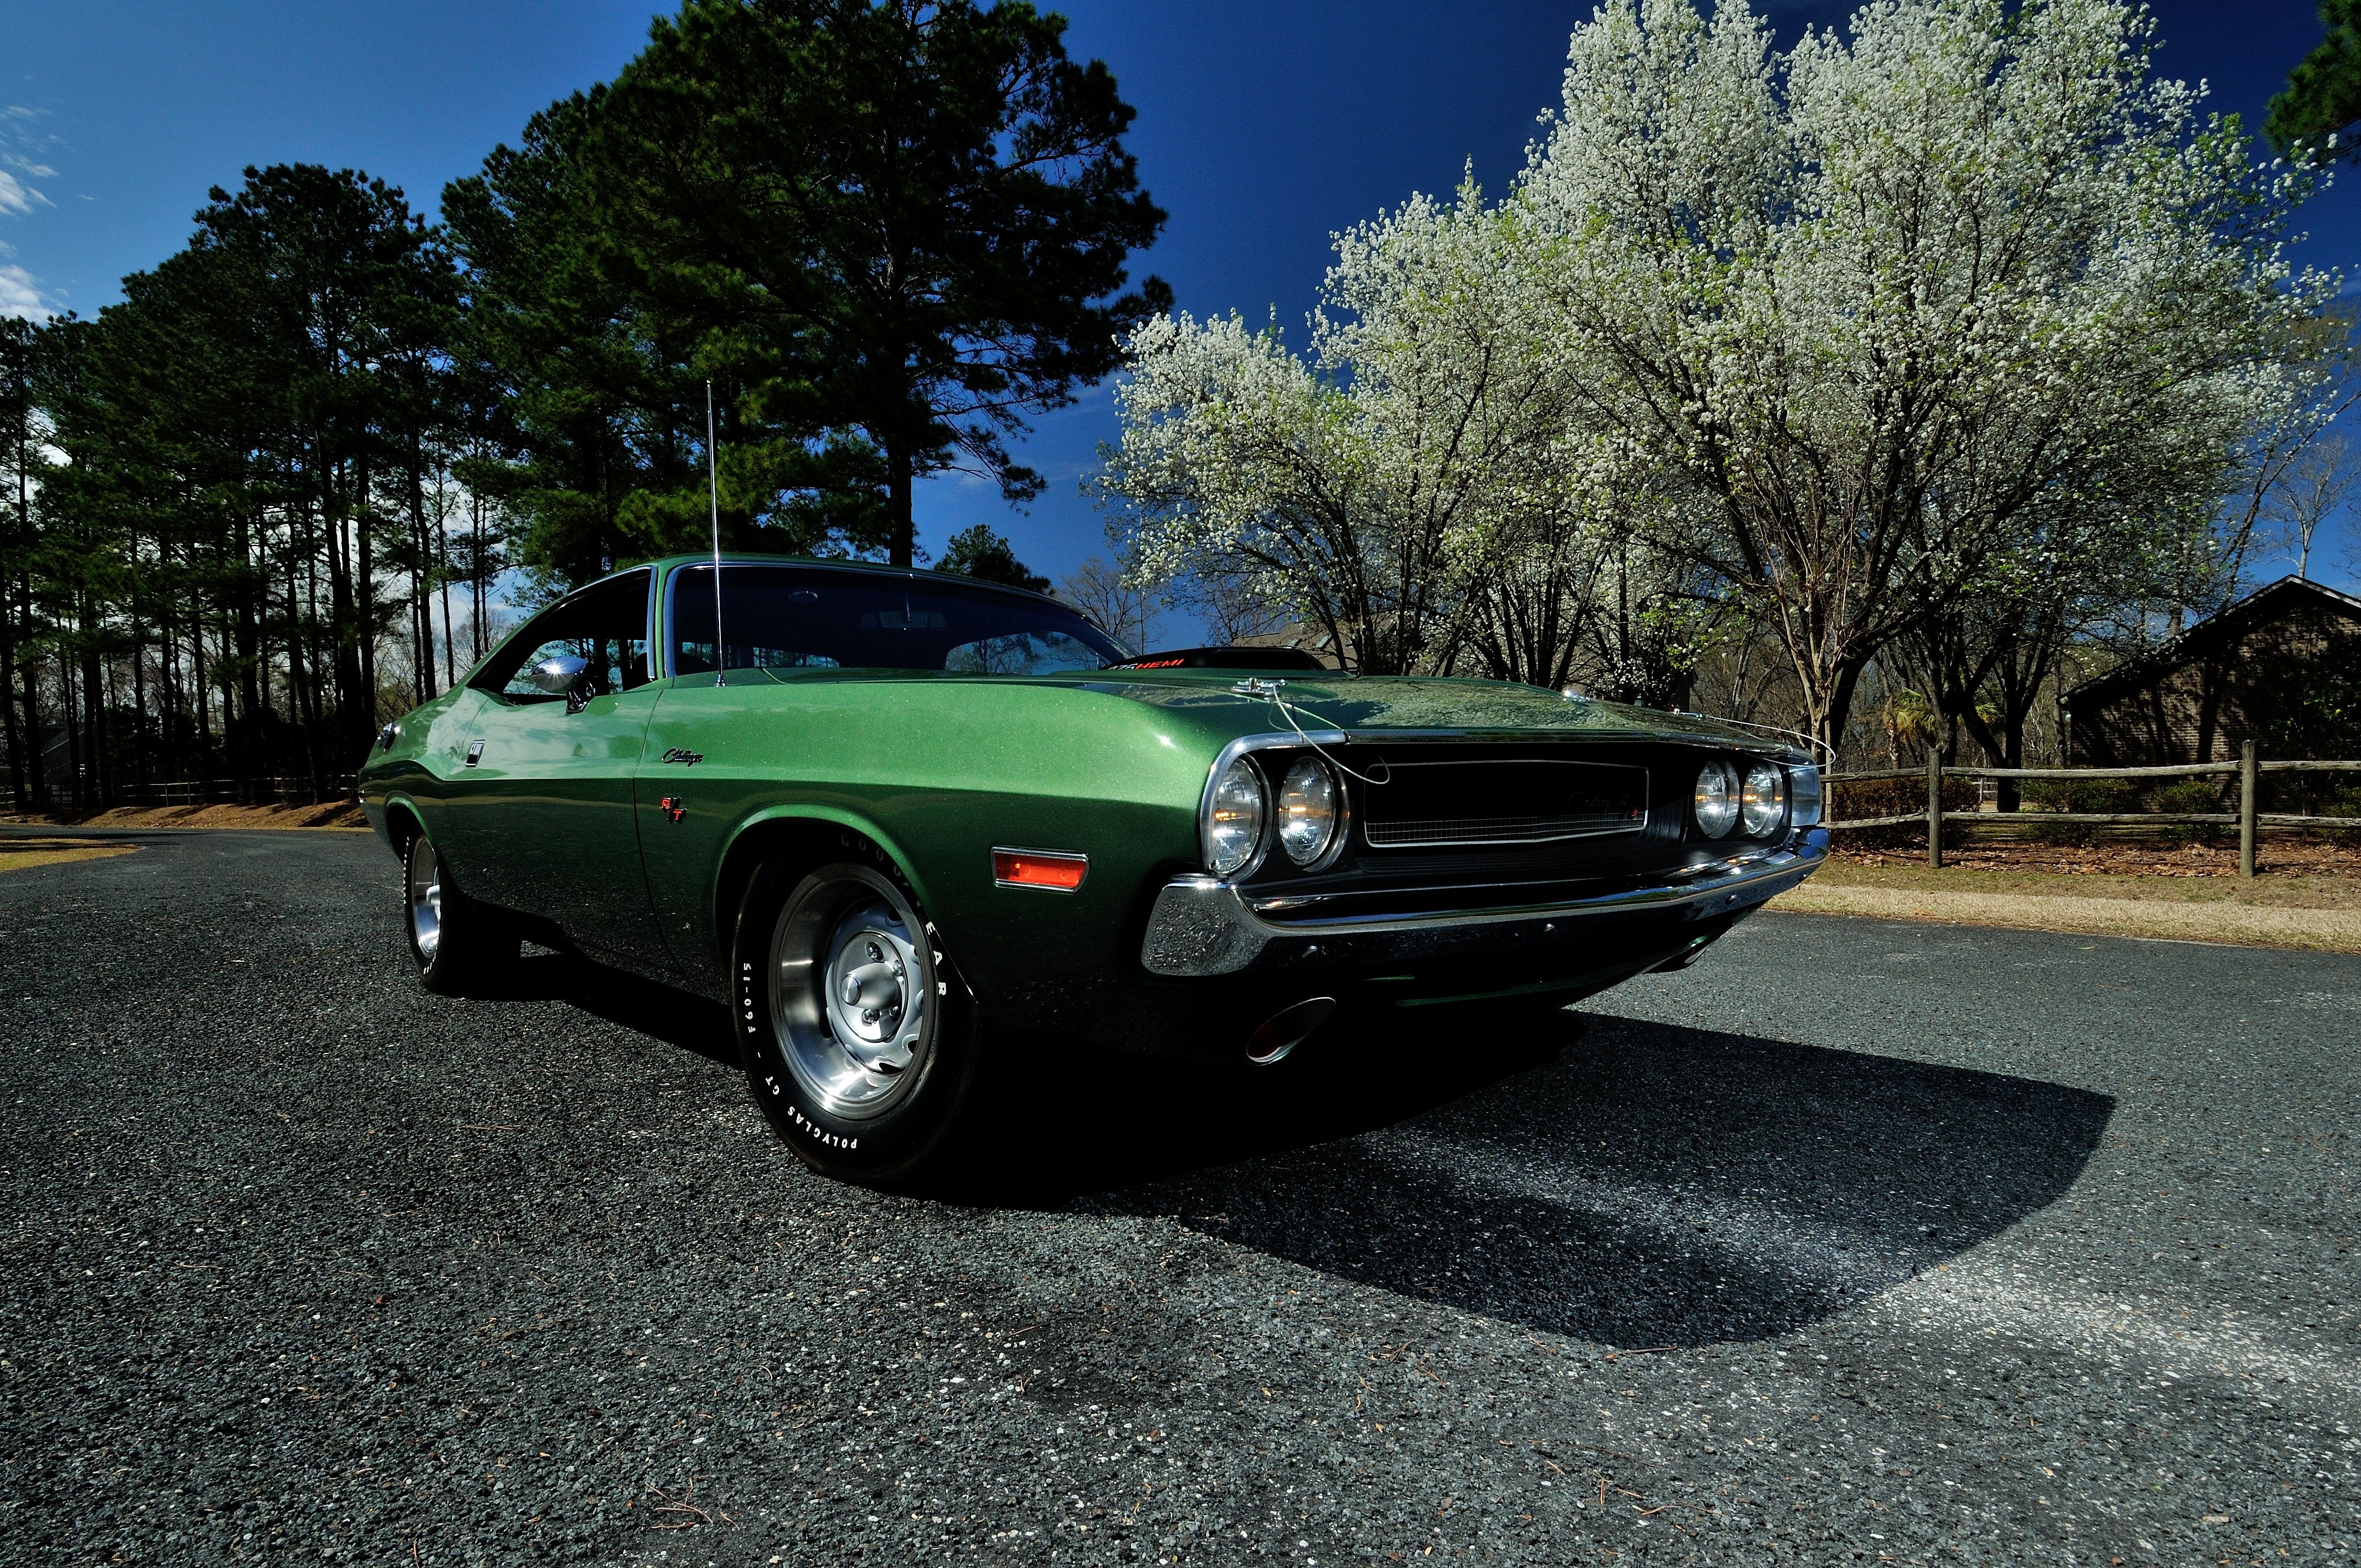 1970, Dodge, Hemi, Challenger, Rt, Muscle, Classic, Old, Usa, 4288x2848 06 Wallpaper